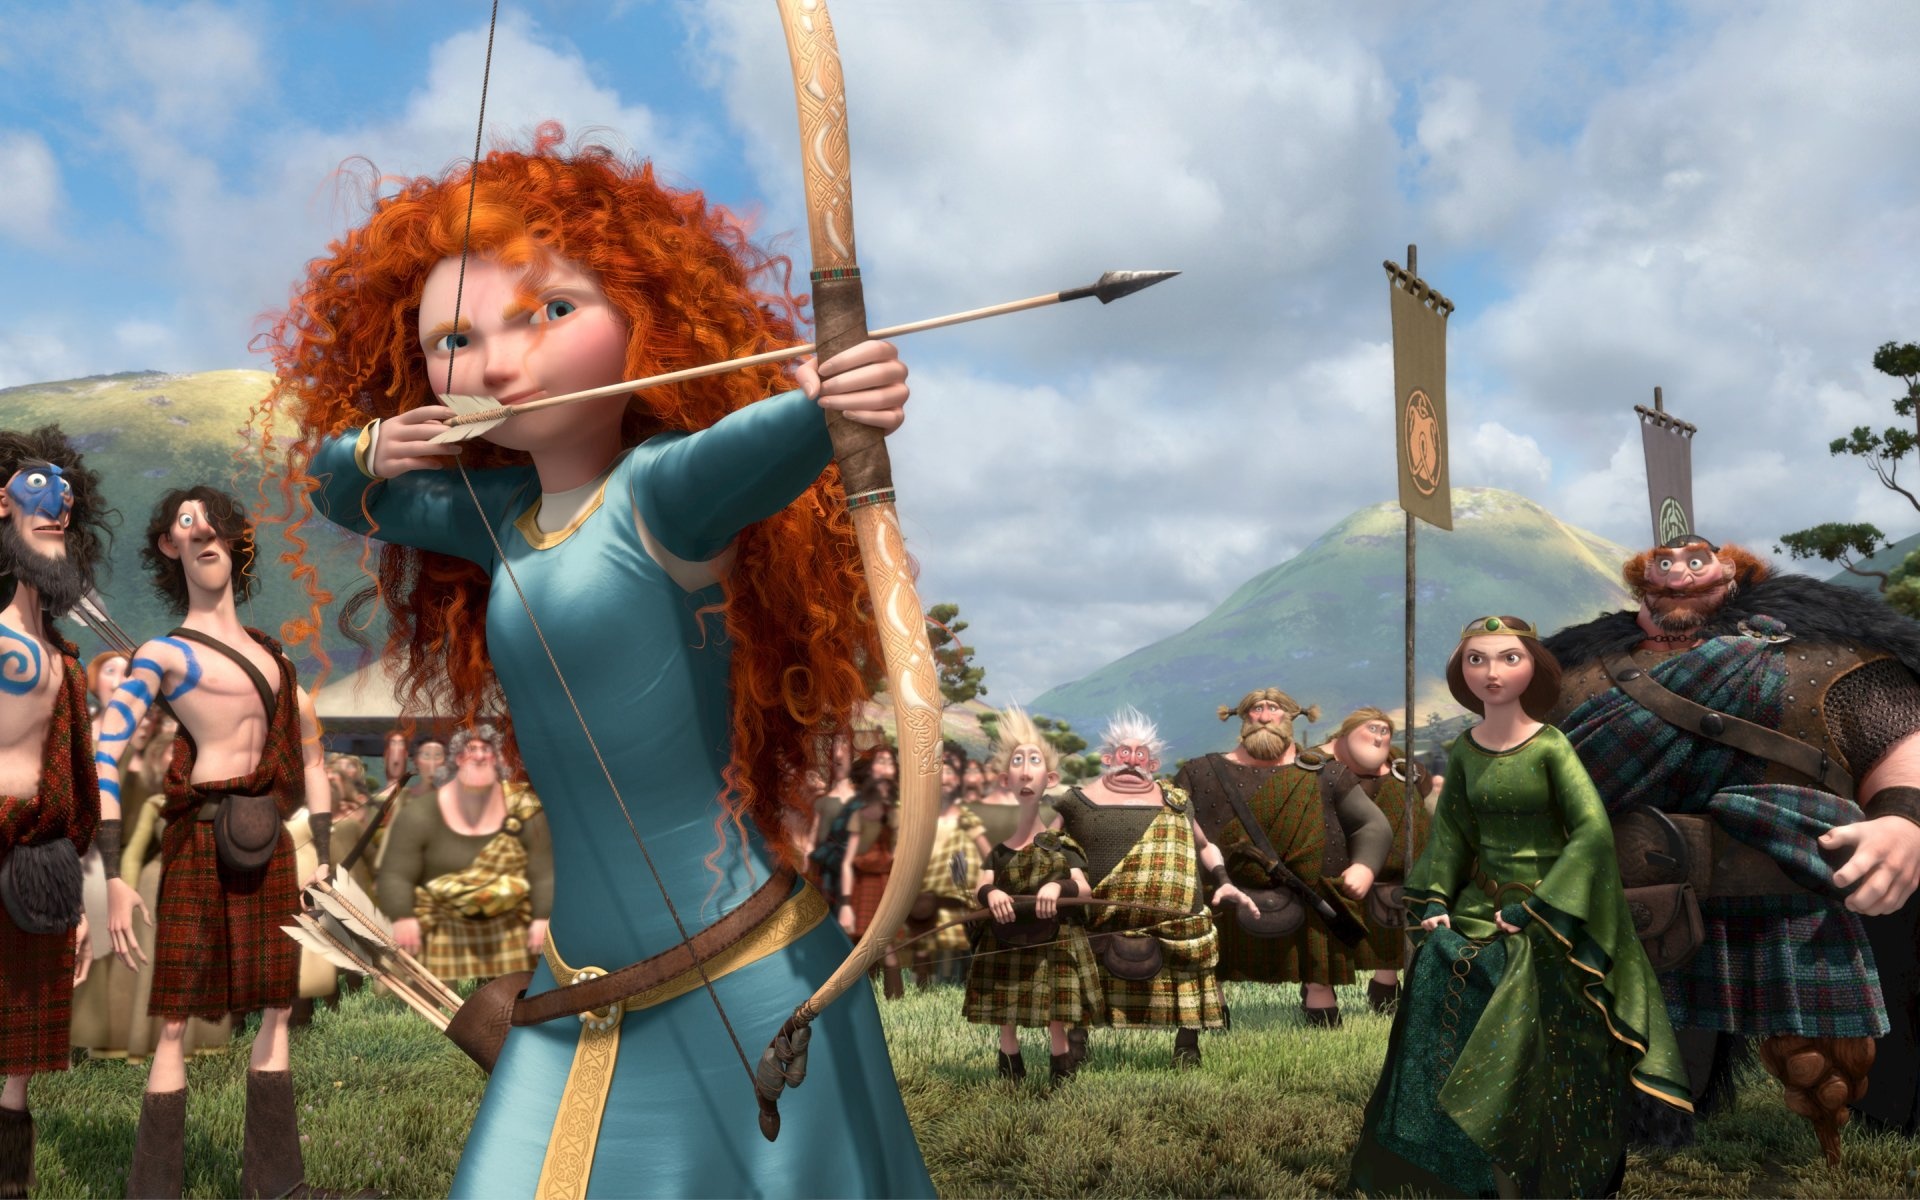 Brave (Disney): The story of the red-haired Merida, princess of a Scottish kingdom known as DunBroch. 1920x1200 HD Wallpaper.